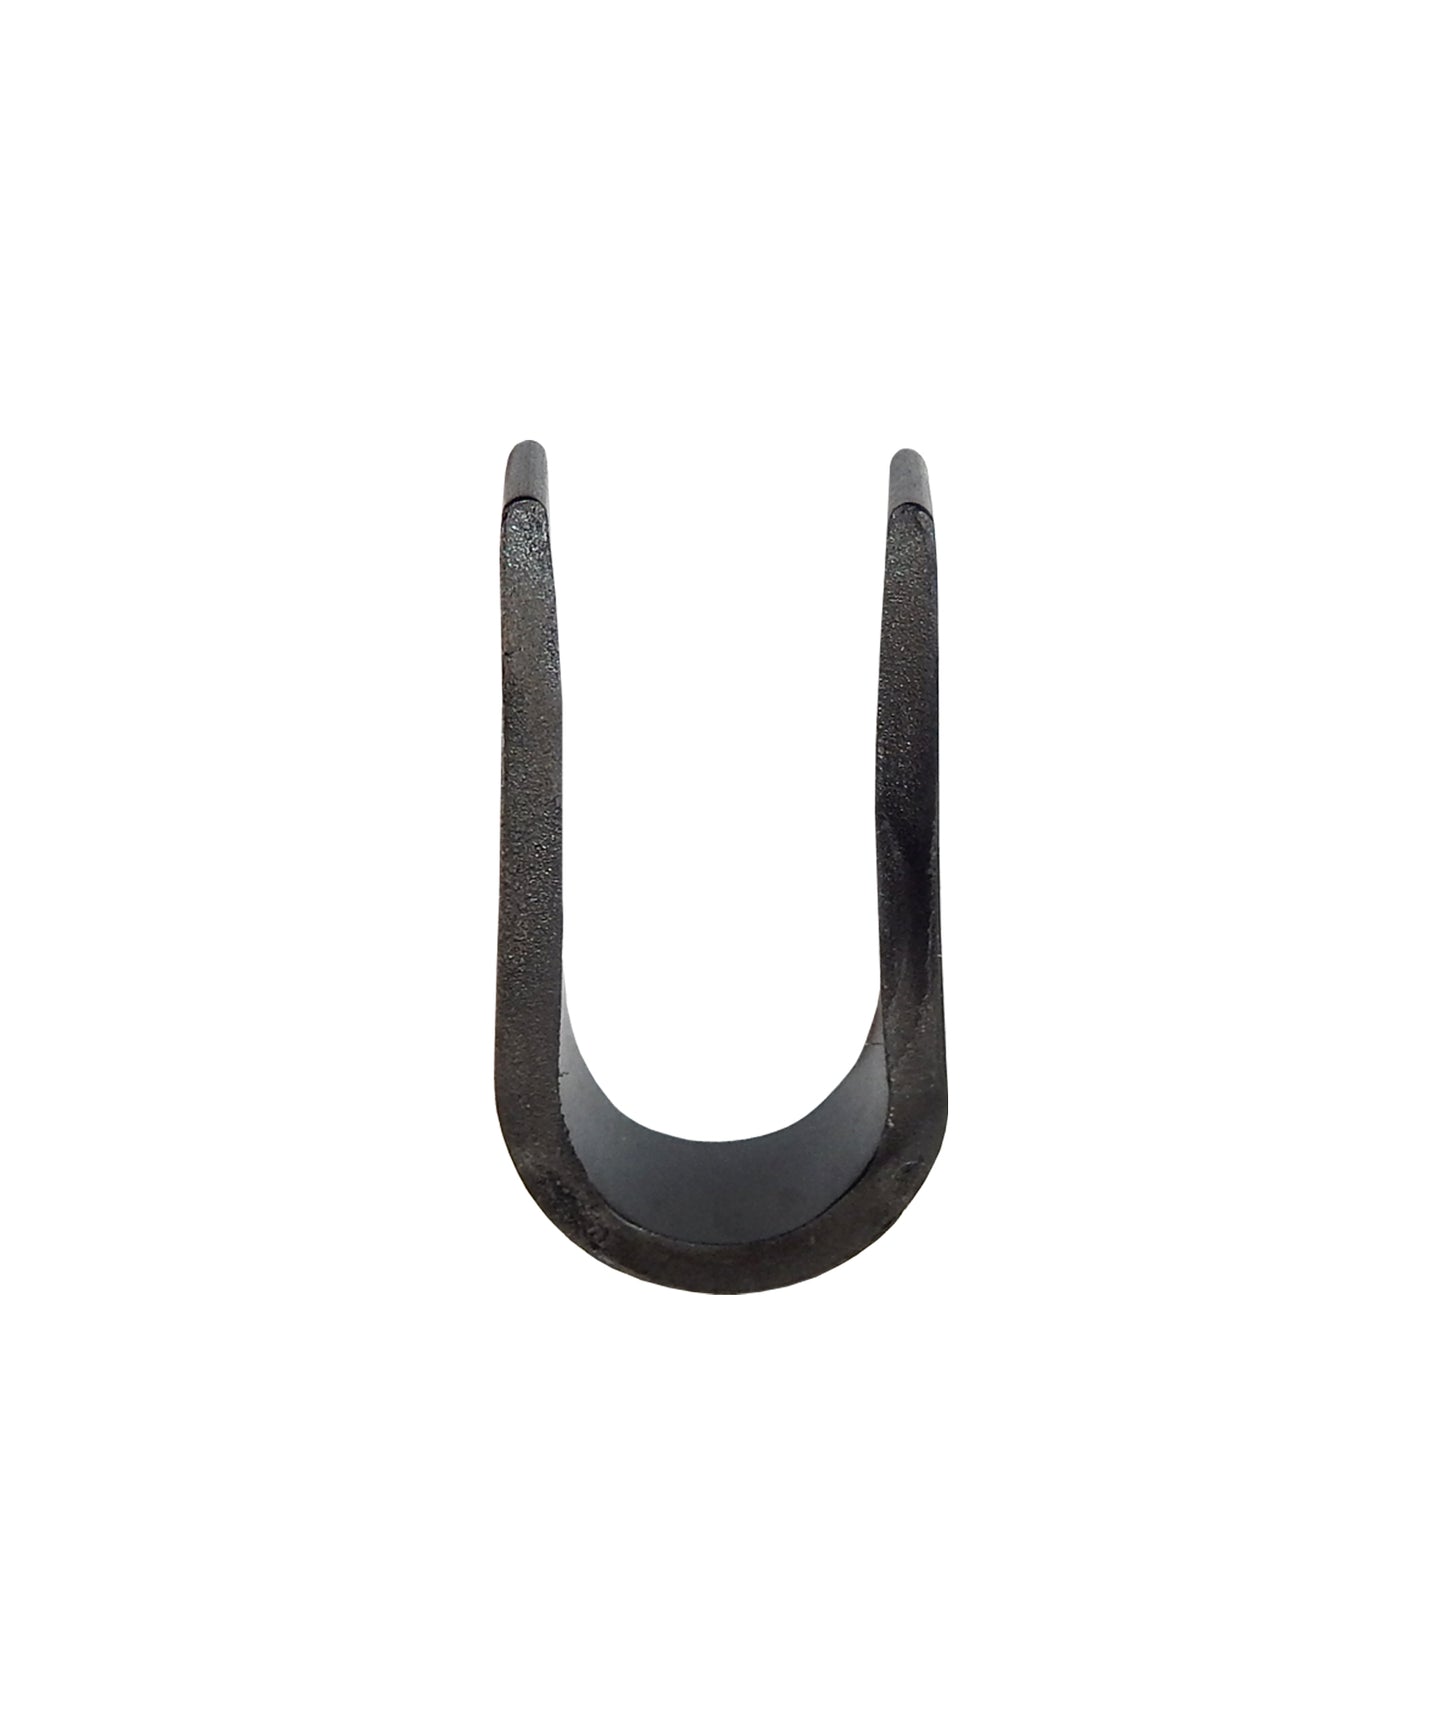 Aftermarket Auger Tooth, 35 Size for CS & AG Aggressor Augers, Replaces 133835